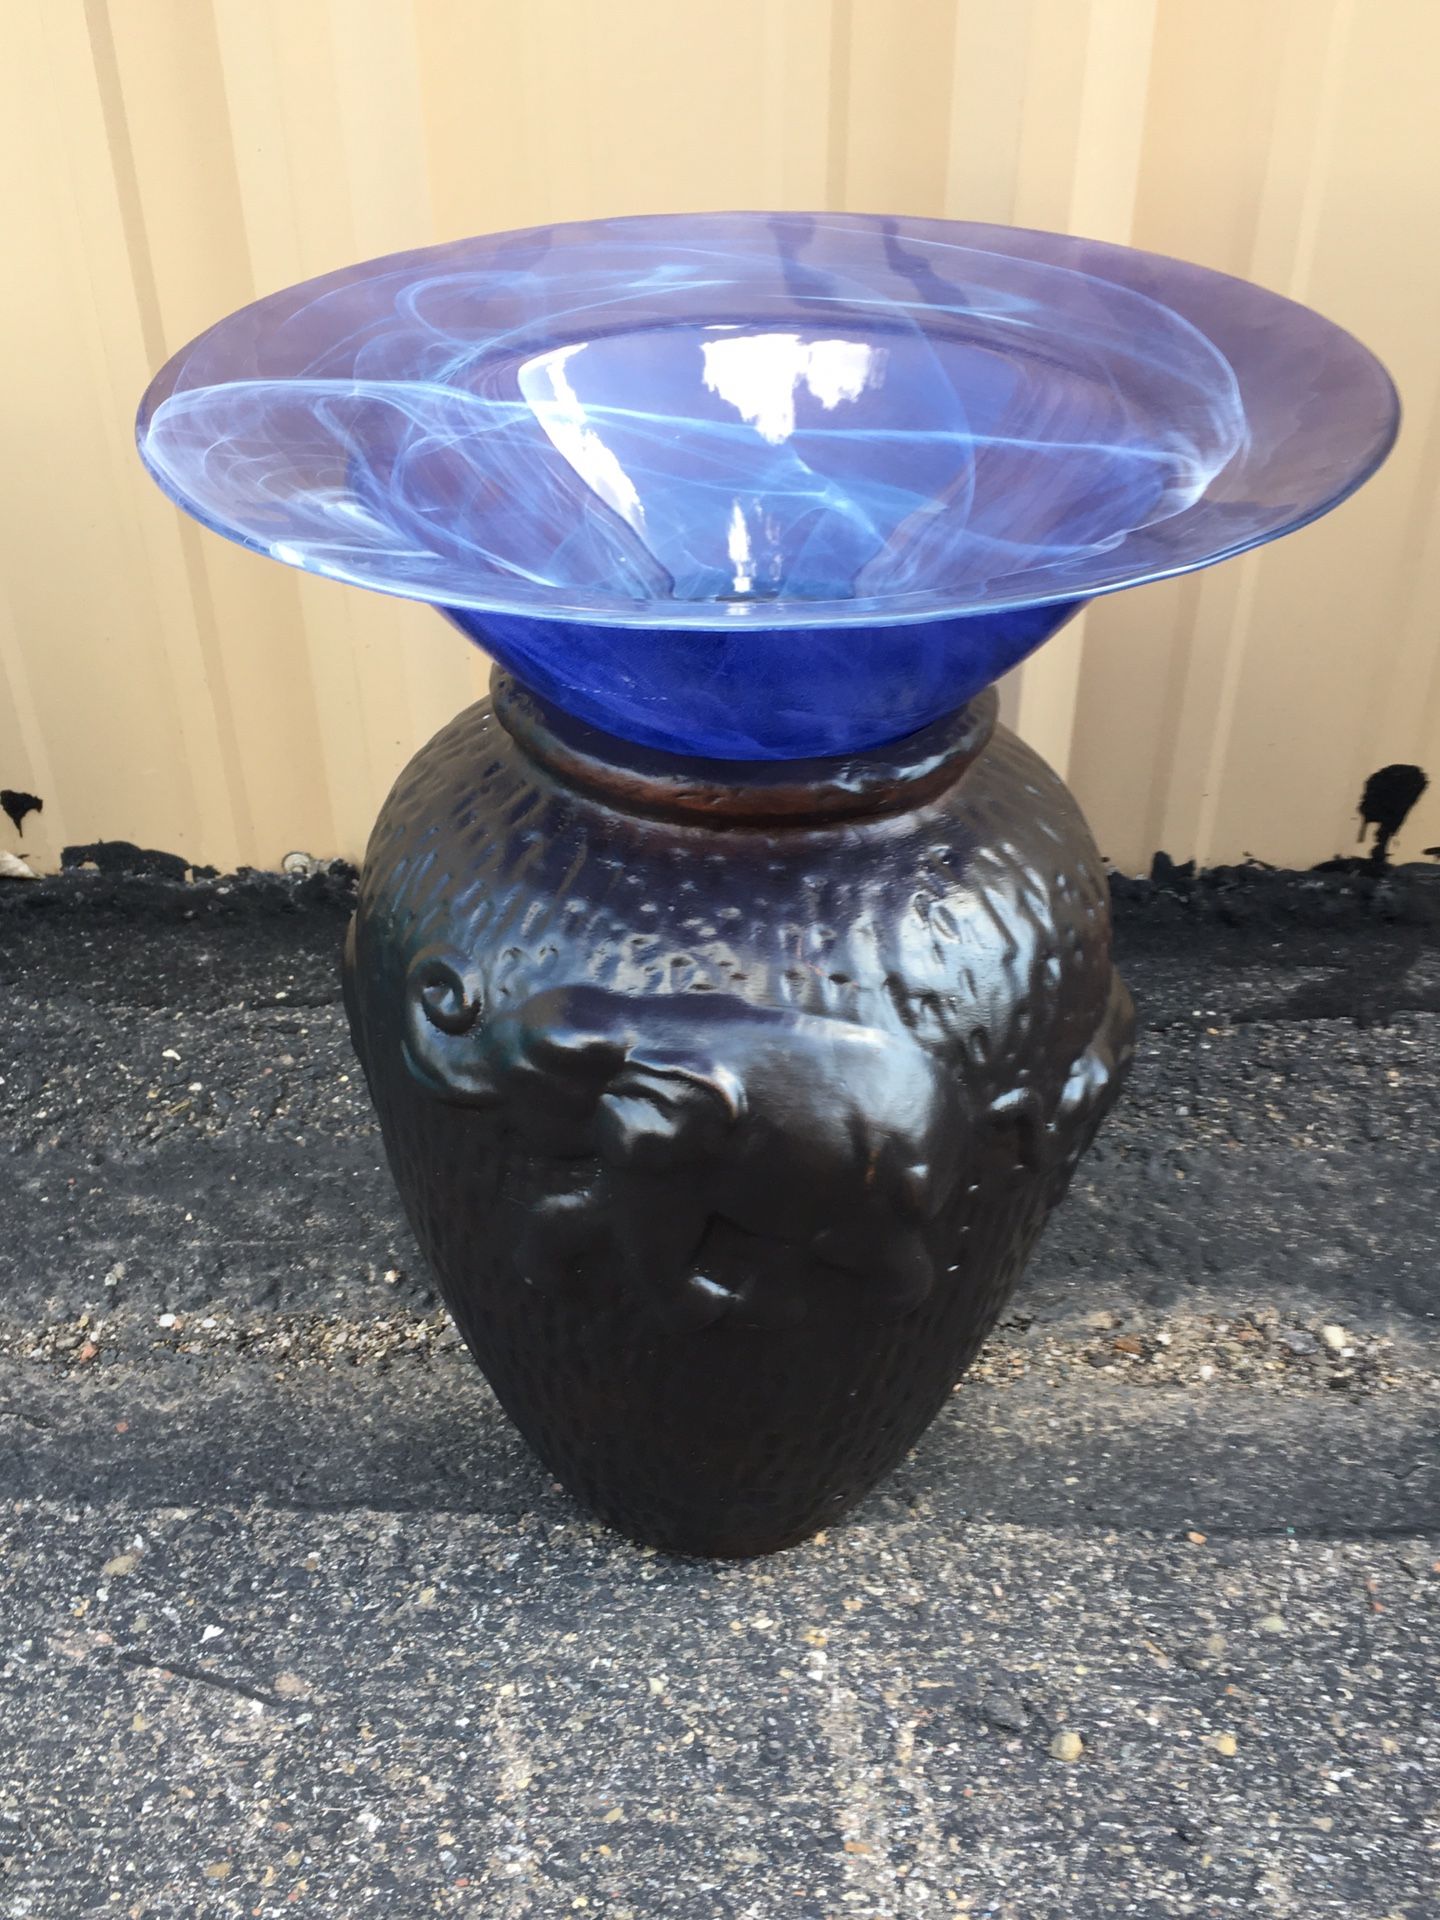 Bird Bath gorgeous purple glass bowl with swirls of white with Pottery stand- sweet!!!